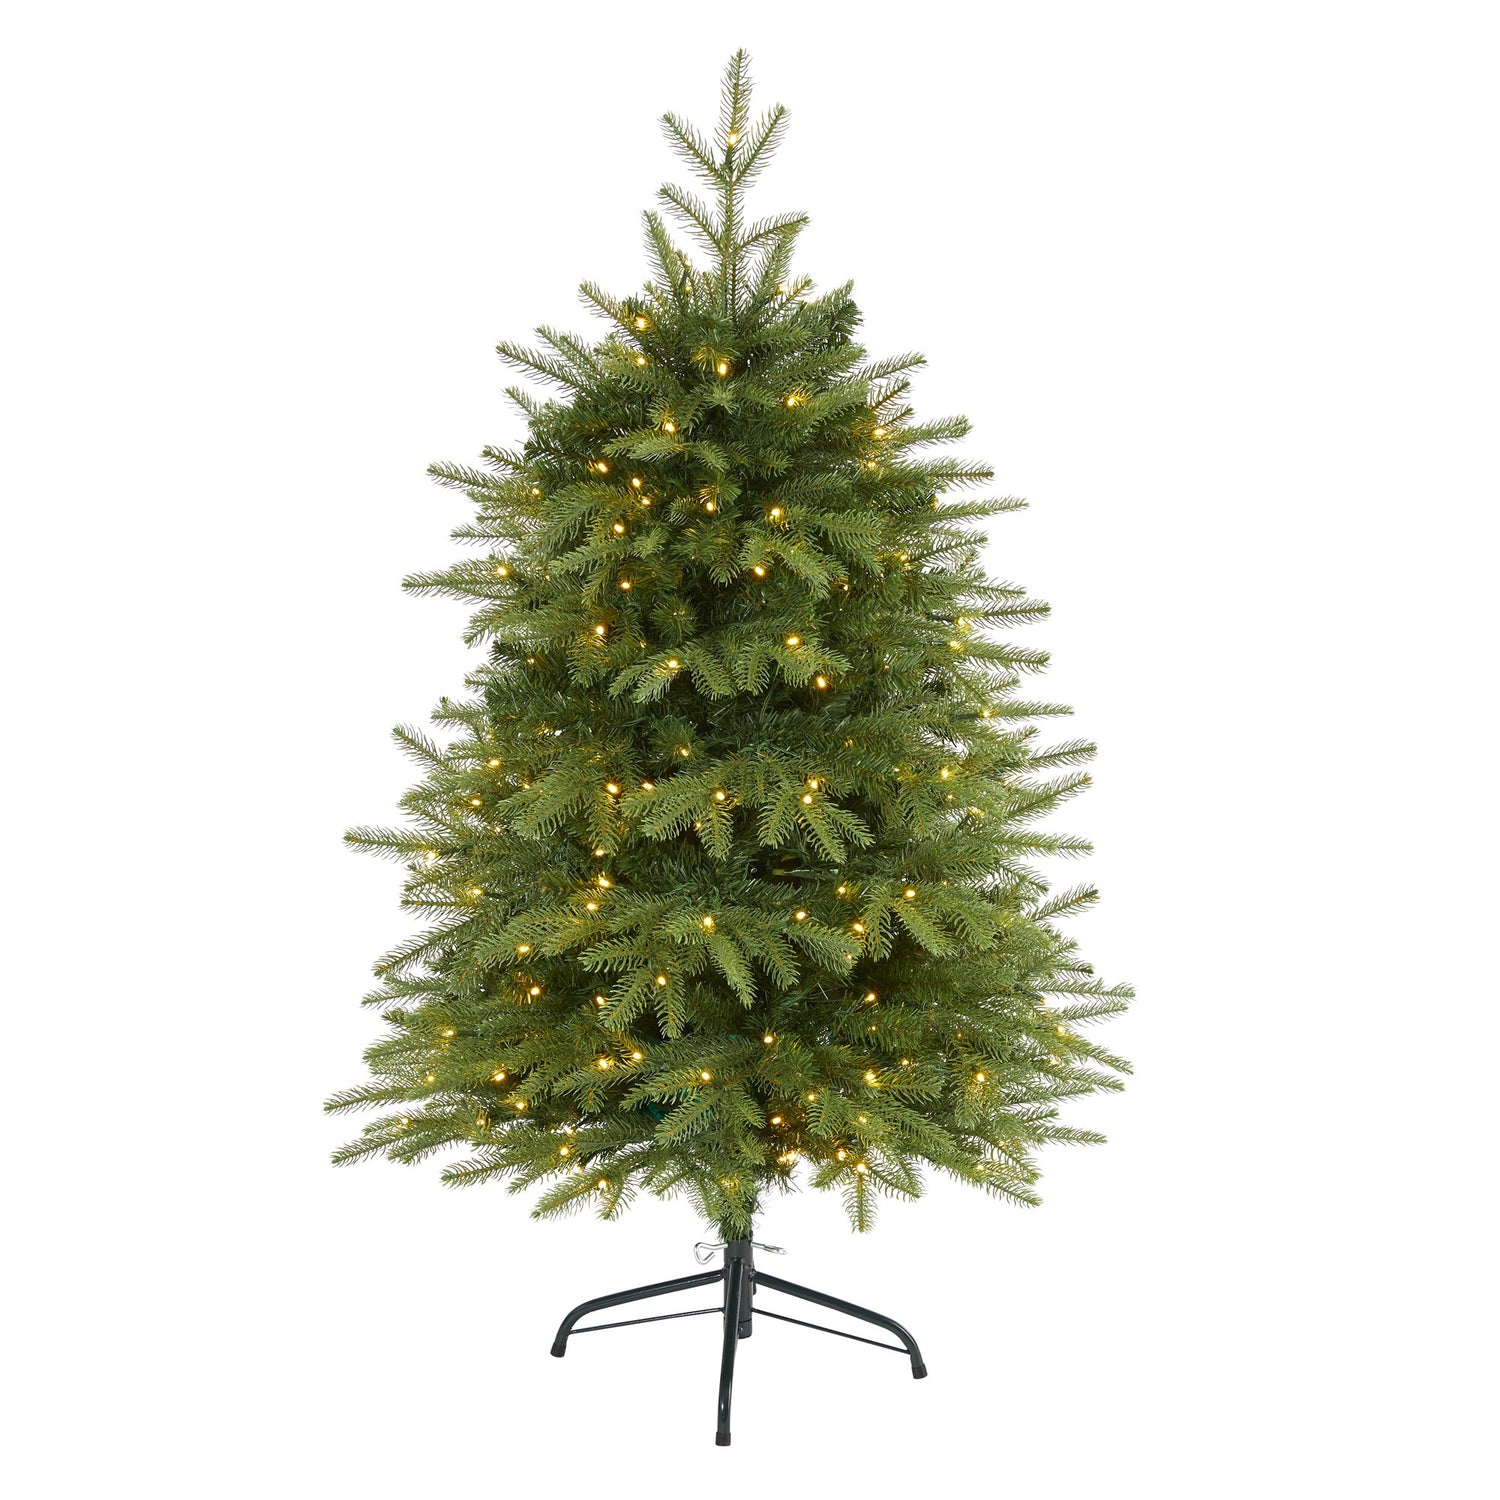 4’ Vancouver Fir “Natural Look” Artificial Christmas Tree with 250 Clear LED Lights and 814 Bendable Branches